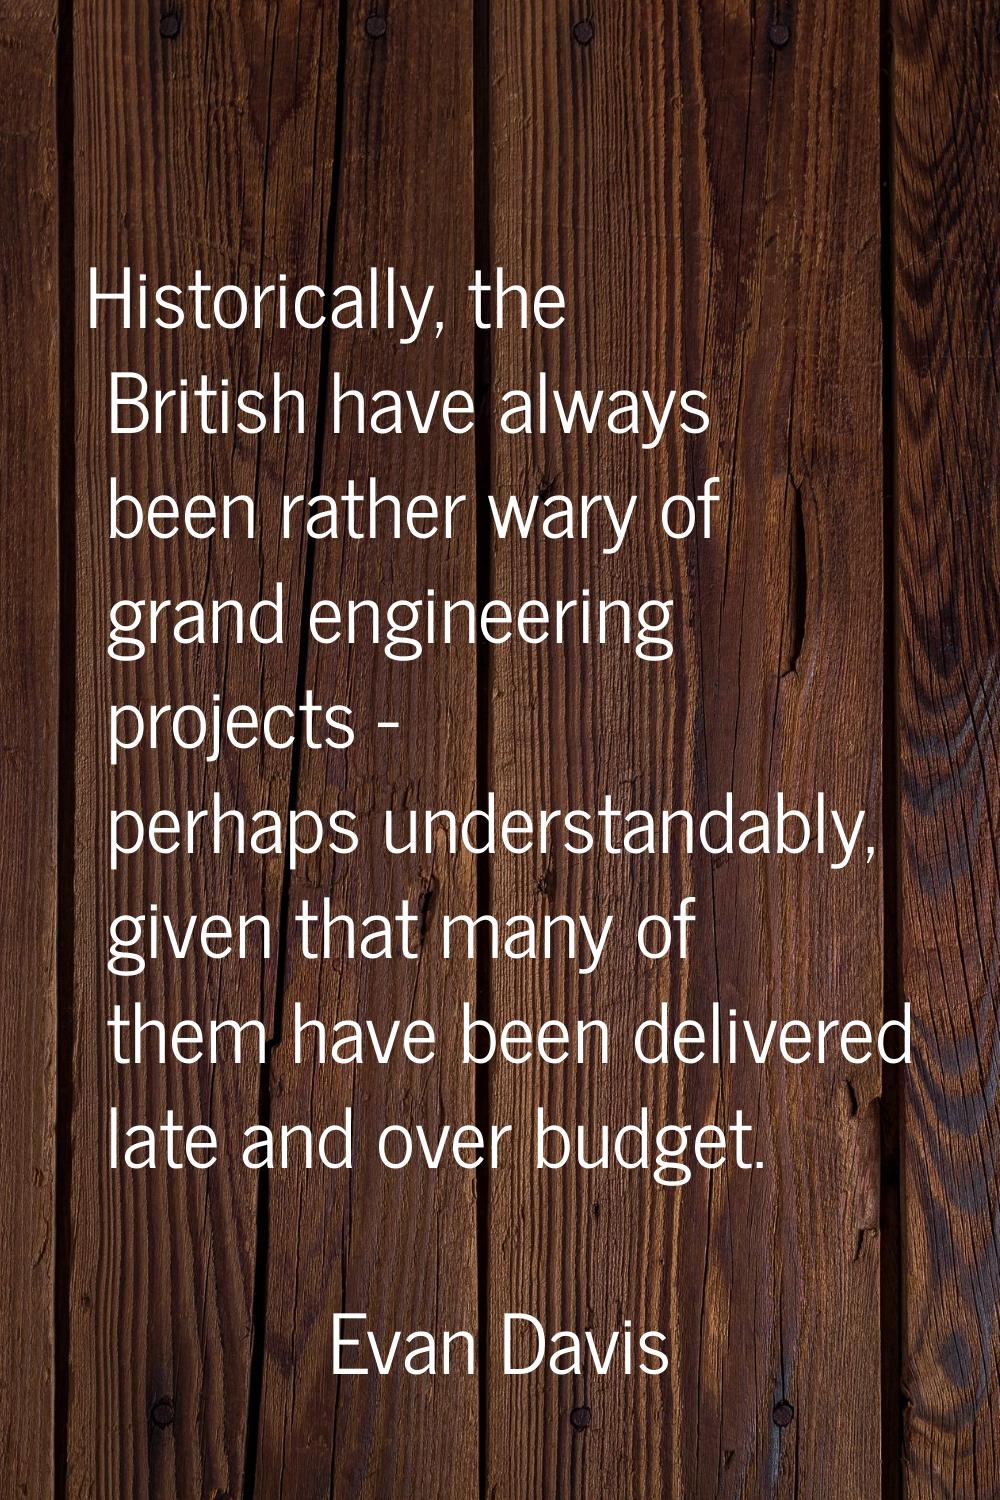 Historically, the British have always been rather wary of grand engineering projects - perhaps unde